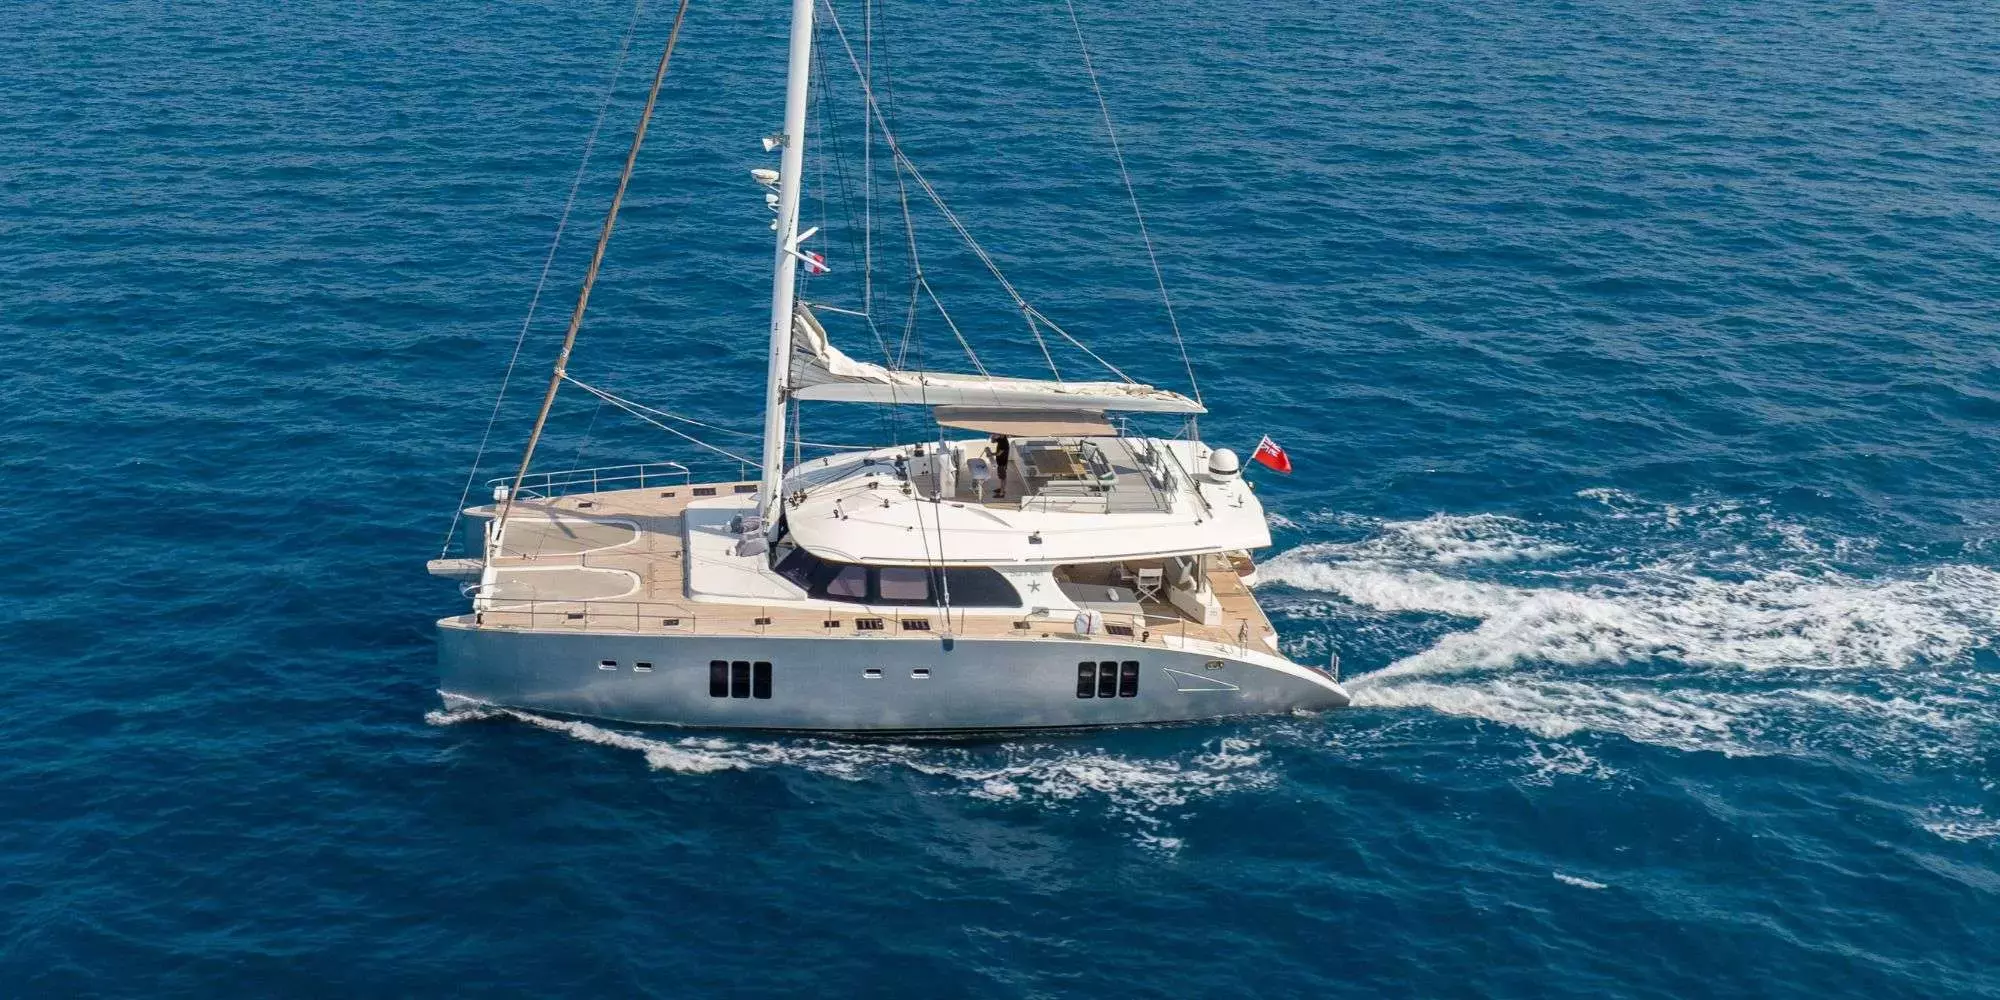 Seazen II by Sunreef Yachts - Special Offer for a private Luxury Catamaran Rental in Cannes with a crew